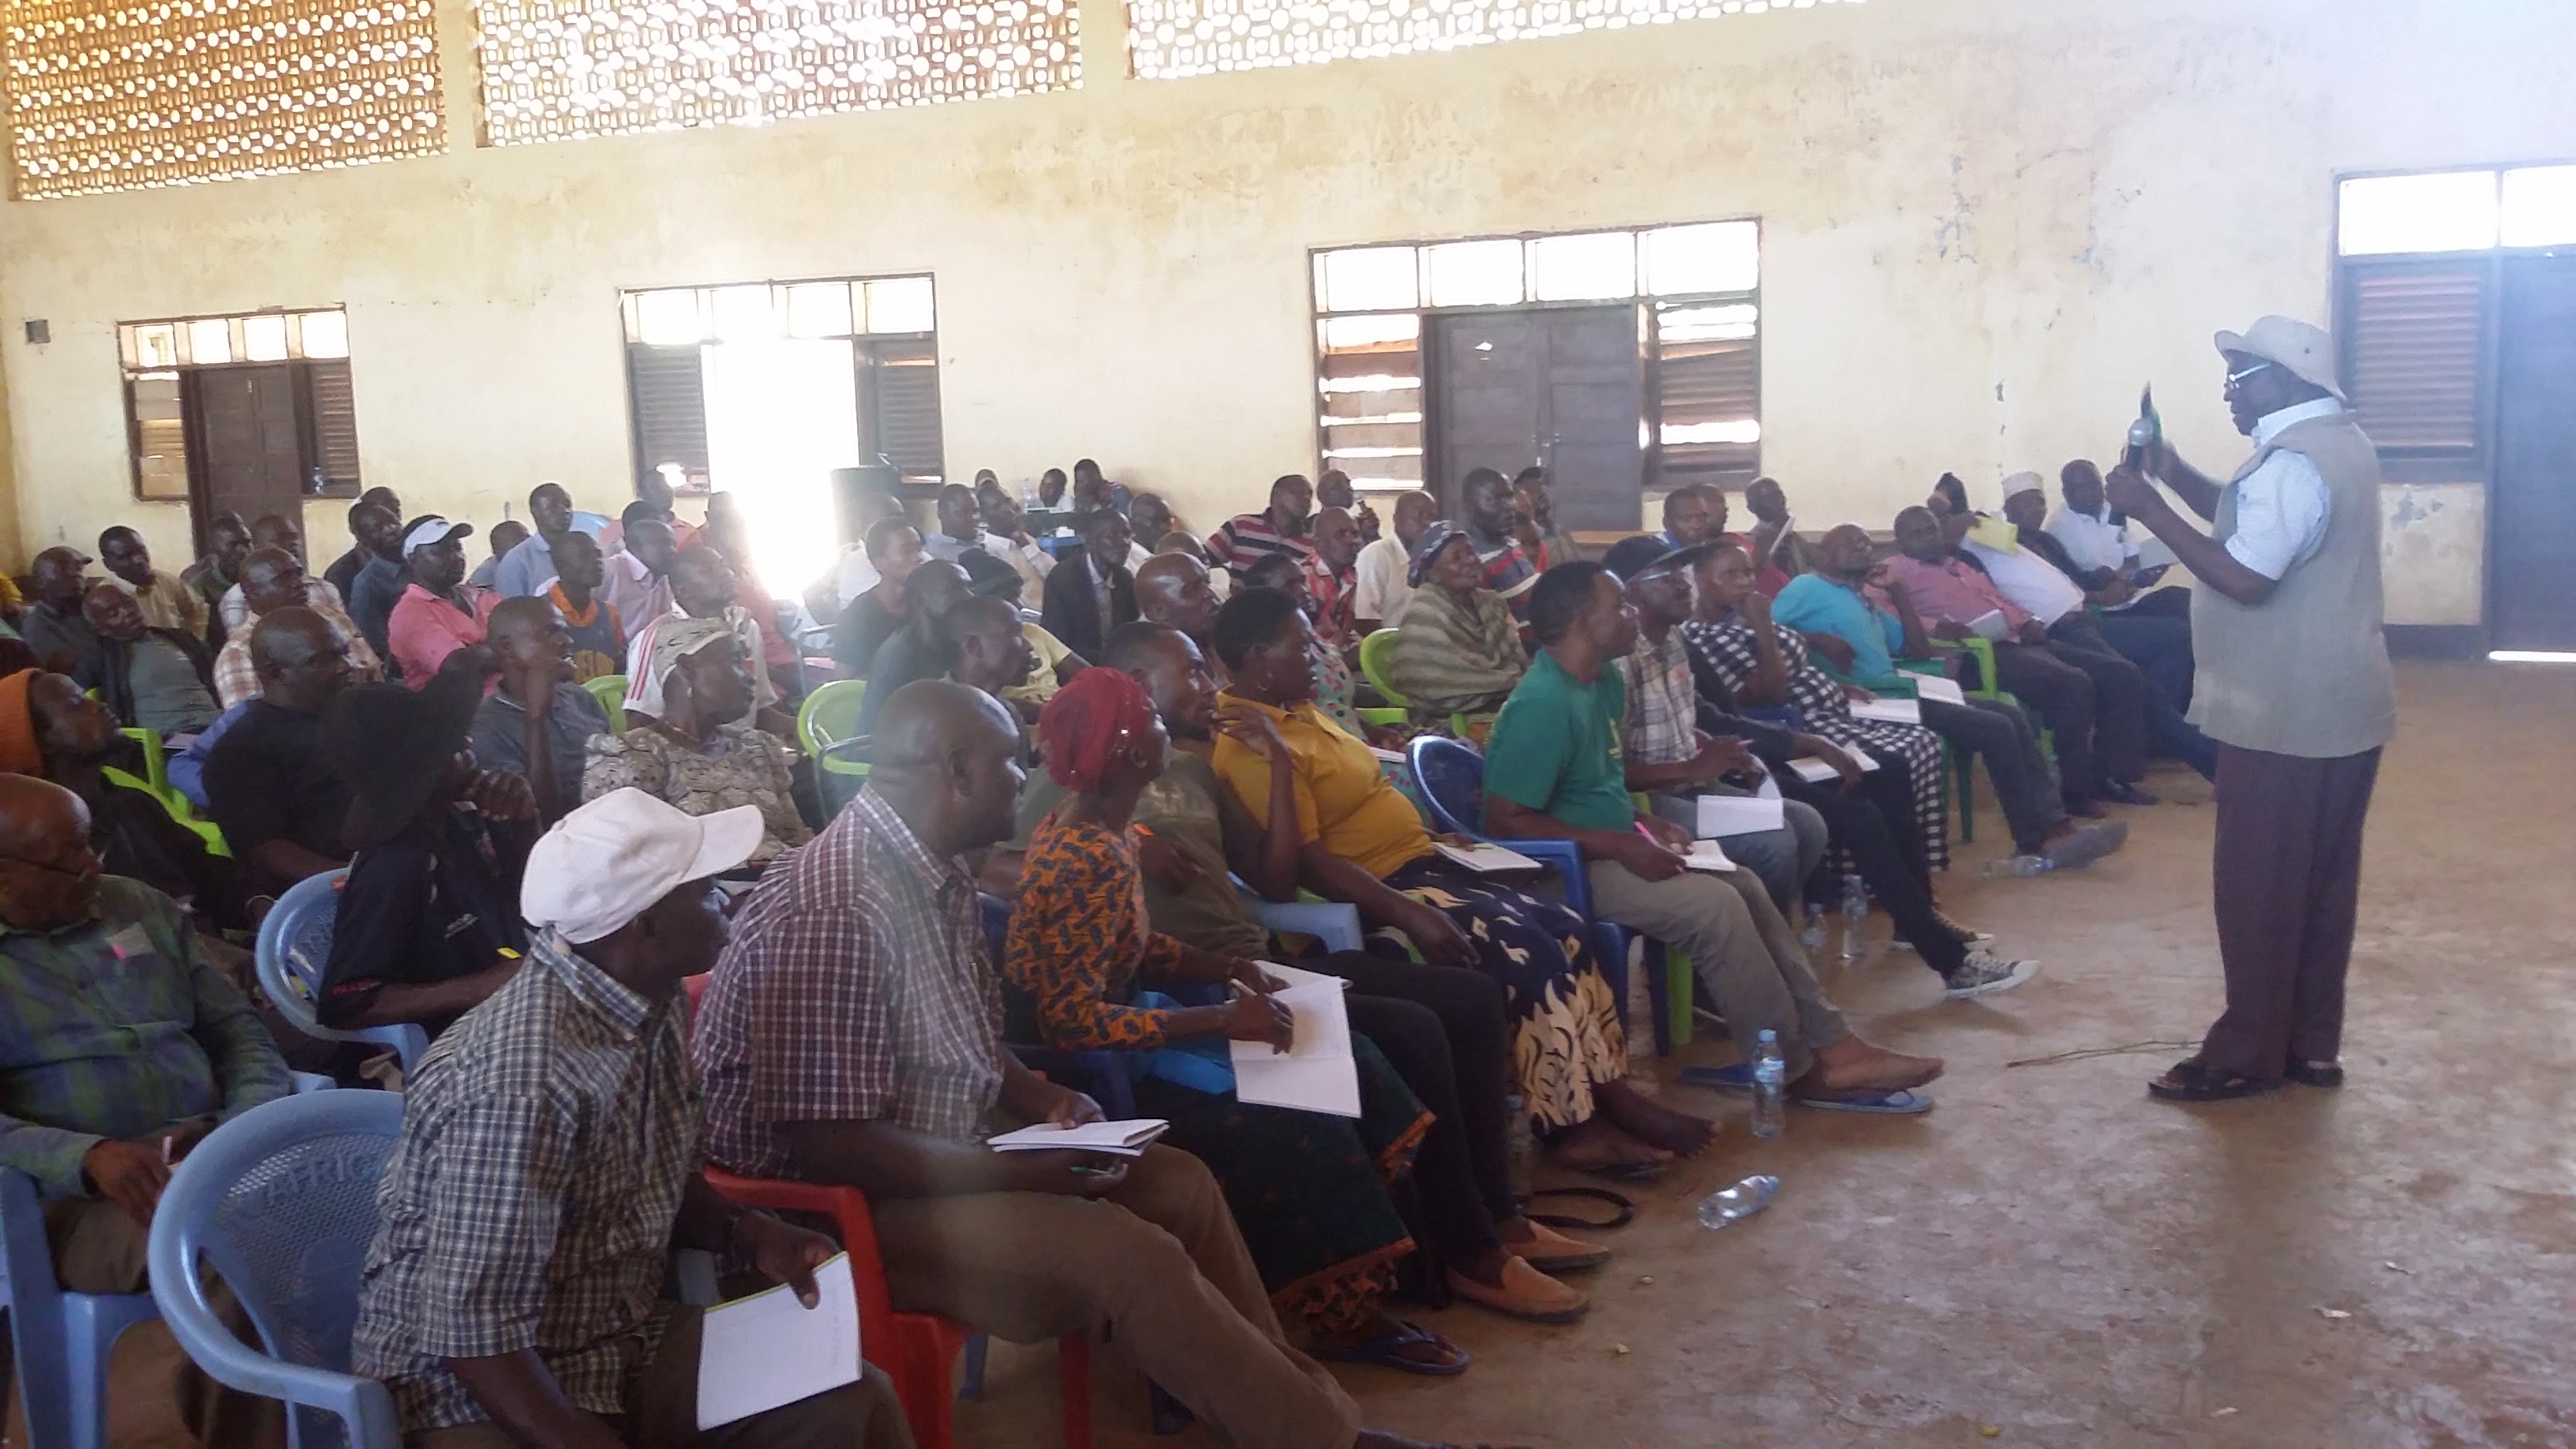 TARI - Makutupora Centre conducted training to farmers and extension officers on Good Agricultural Practices (GAPs) for grape production along the value chain at Chamwino district Council in Dodoma Region.